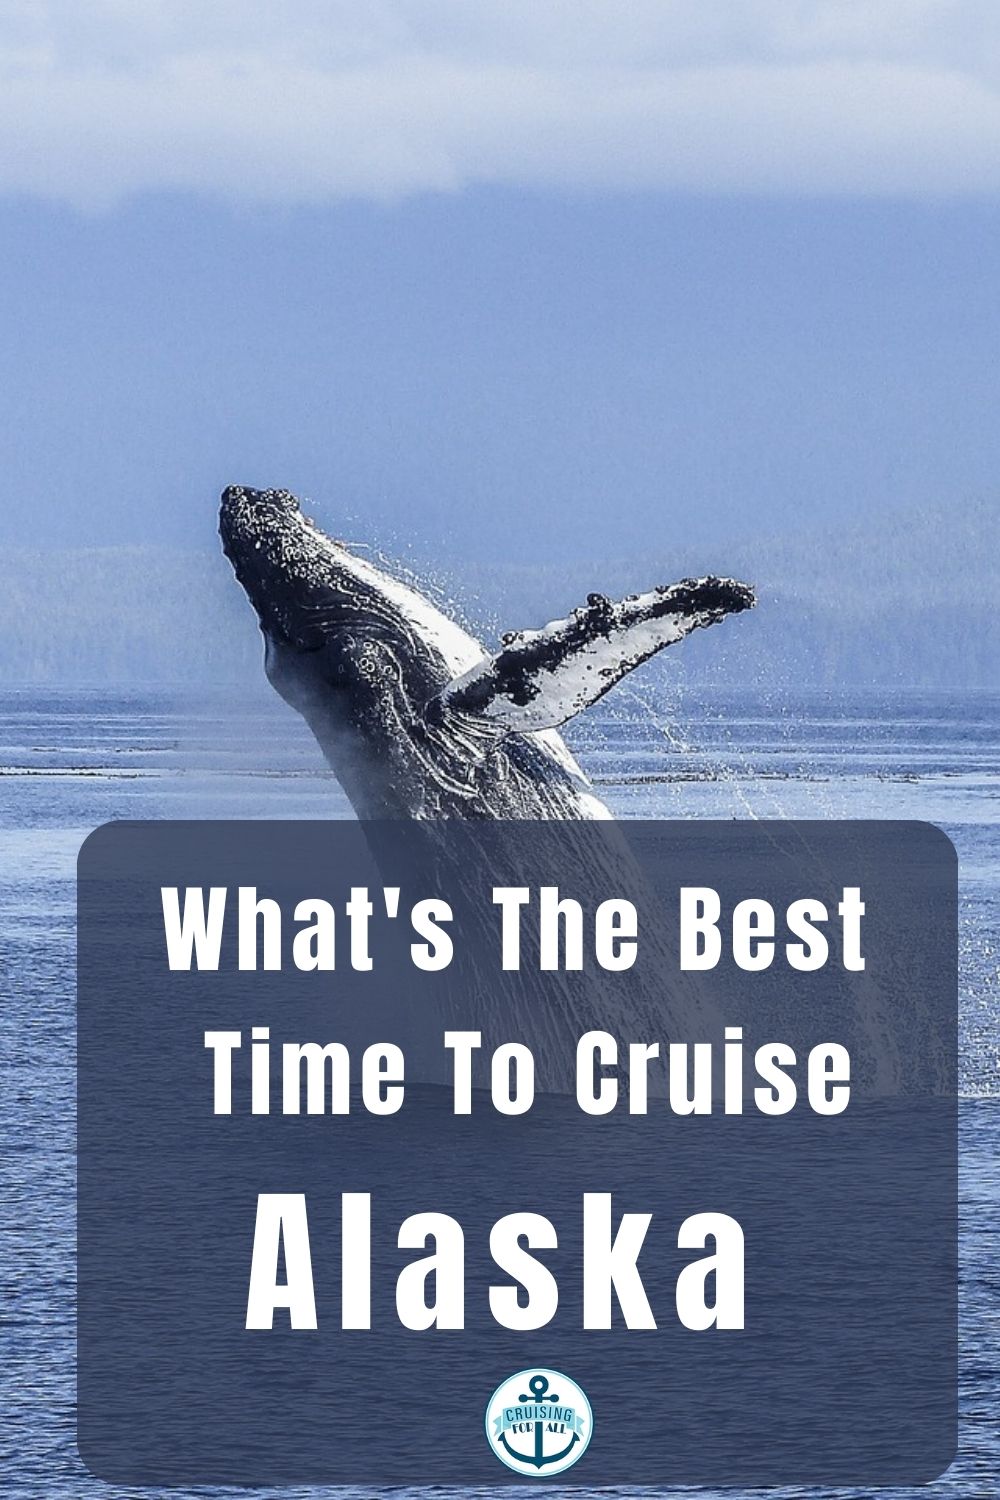 Whats the best time to cruise Alaska for the weather, to avoid the crowds and see wildlife and which cruise lines cruise to Alaska